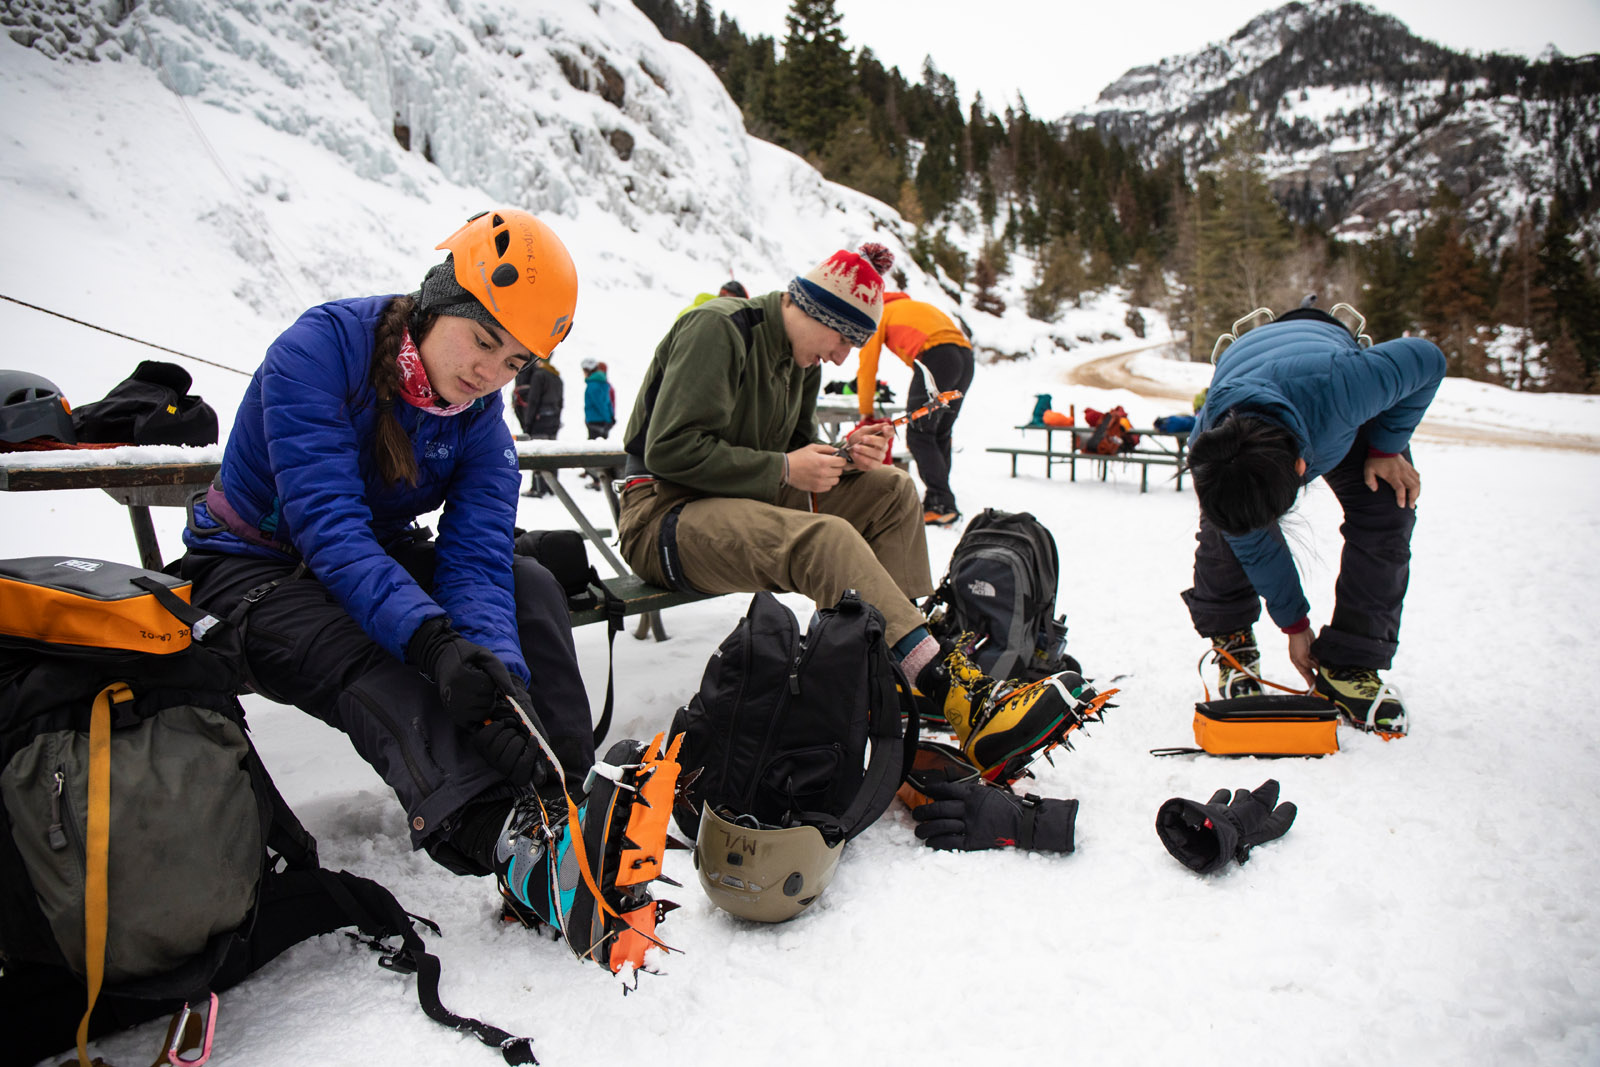 <strong>Kaila Ablao ’21</strong>, <strong>James Hanafee ’22</strong> and <strong>Saria Sato Bajracharya ’20</strong> learn how to attach their crampons to the snow boots they need in order to enter the ice park. The blades on the crampons are necessary not just for climbing the large ice-covered rock faces but also for safely hiking on the mountain trails in the park. Outdoor Education took students new to ice climbing to the Ouray Ice Park in Ouray, Colorado during a block break trip. The low-cost trip is designed for students who are new to ice climbing and might not otherwise be able to try out the sport due to the investment required to take lessons and purchase or rent equipment.